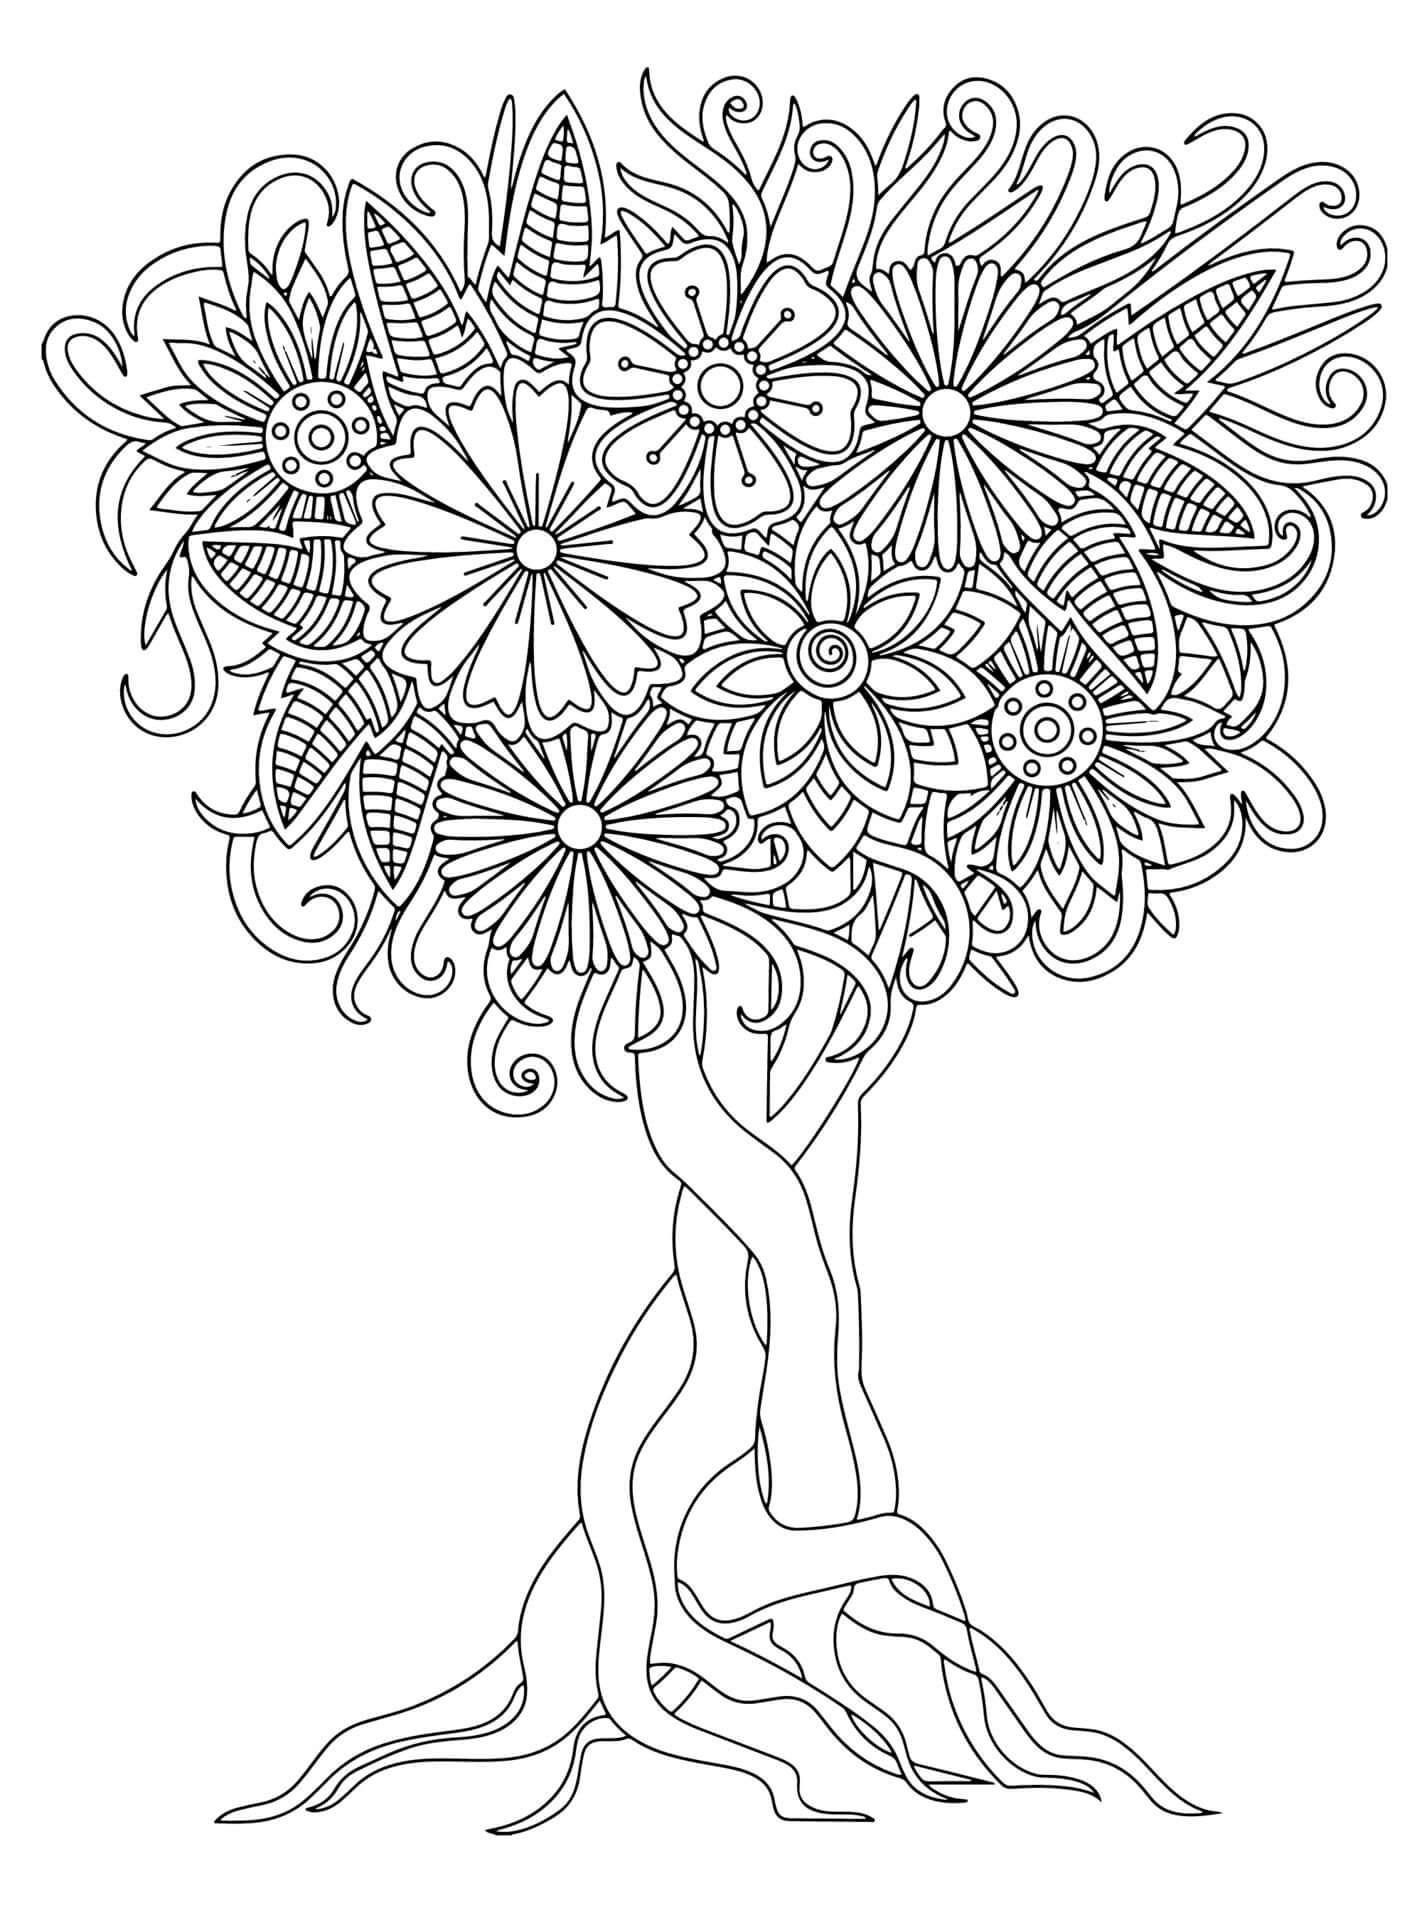 Mandala Tree With Flowers And Leaves Coloring Page Mandala